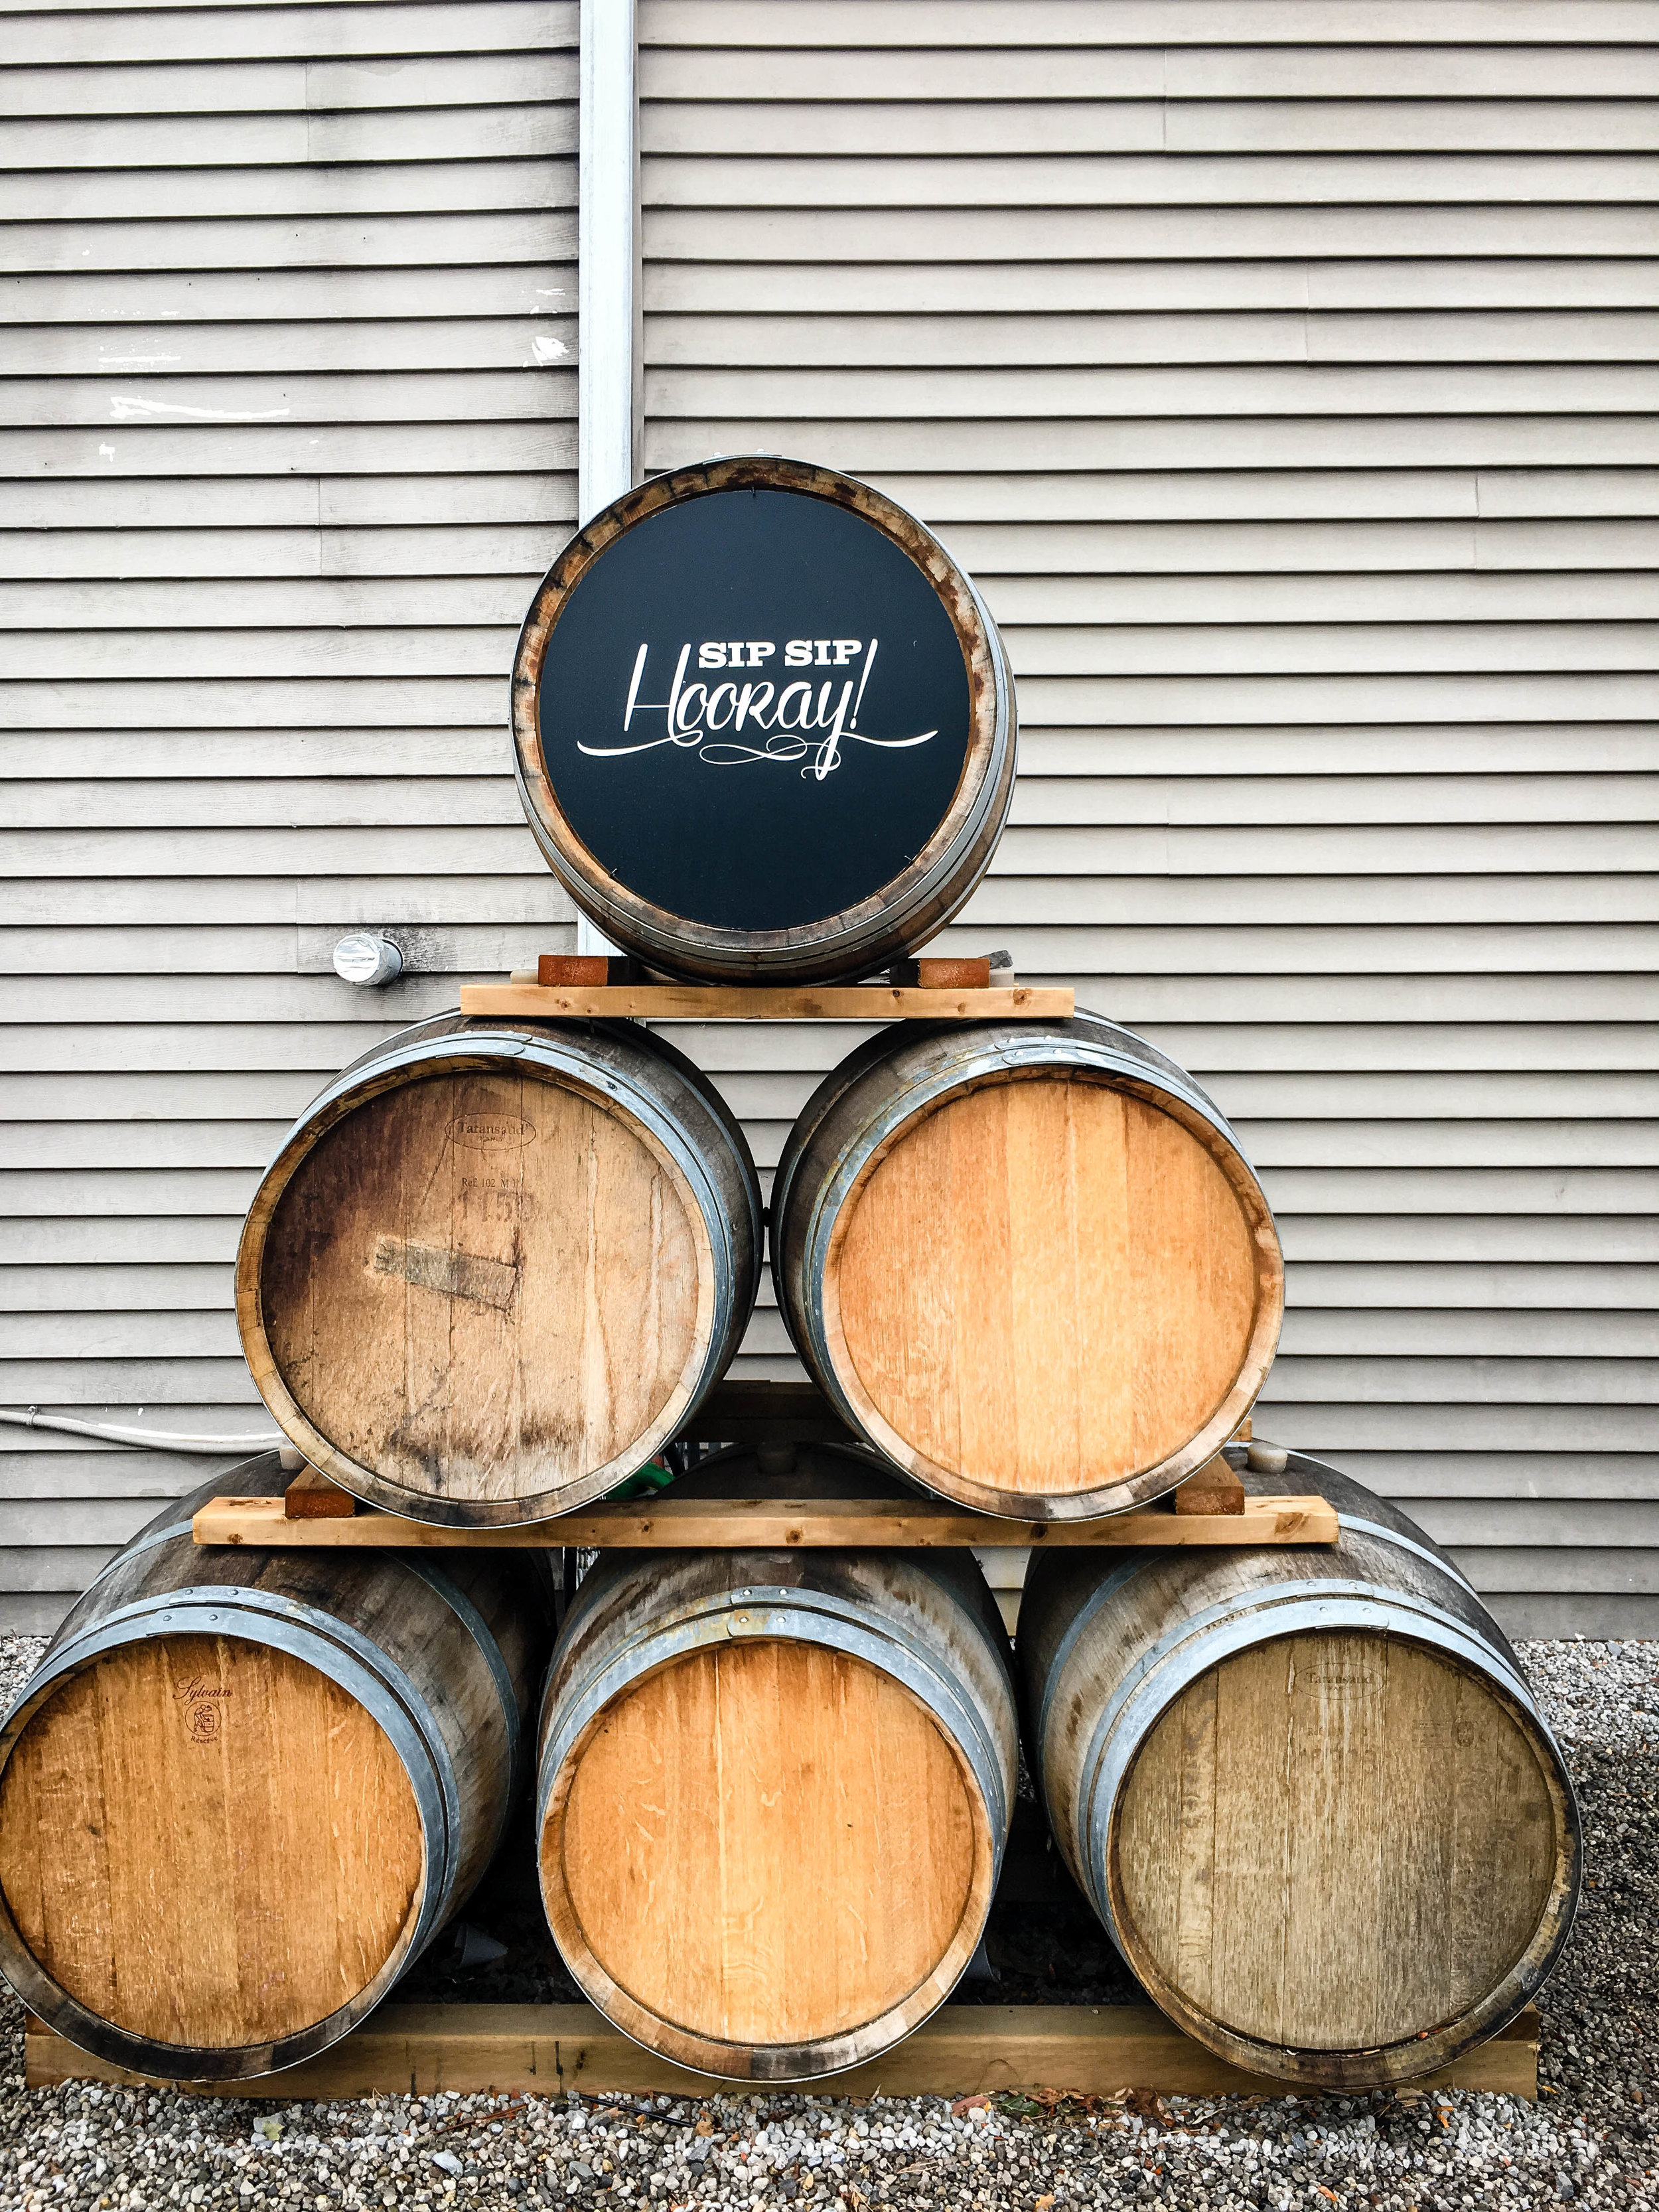 Niagara on the Lake wine barrels with "Hip hip hourray" engravings